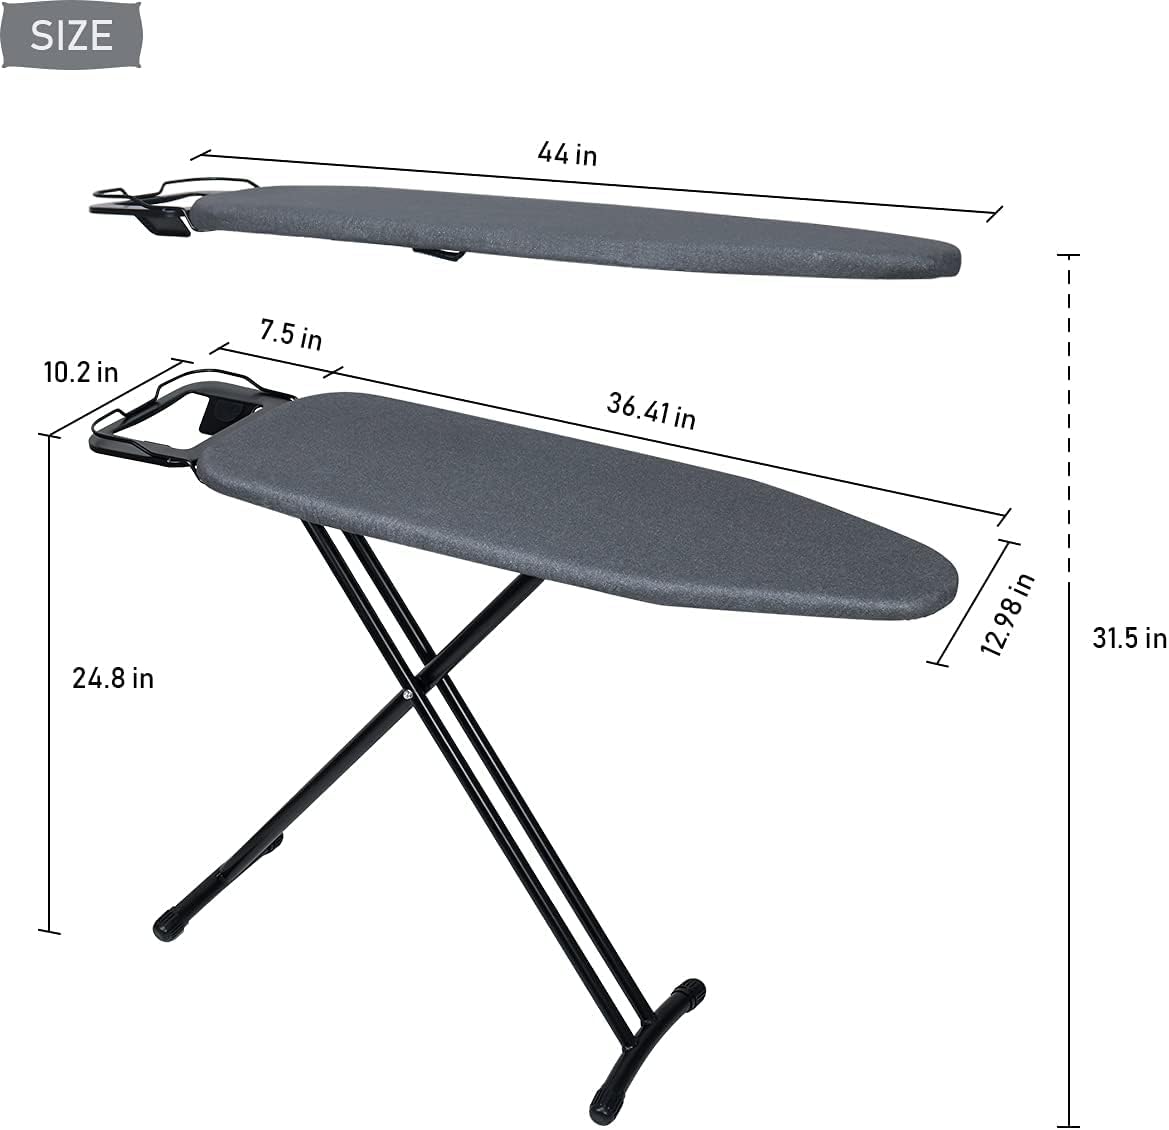 VIO Ironing Board with Heat Resistant Cover and Thicken Felt Pad, Heavy Sturdy Legs (BLACK)